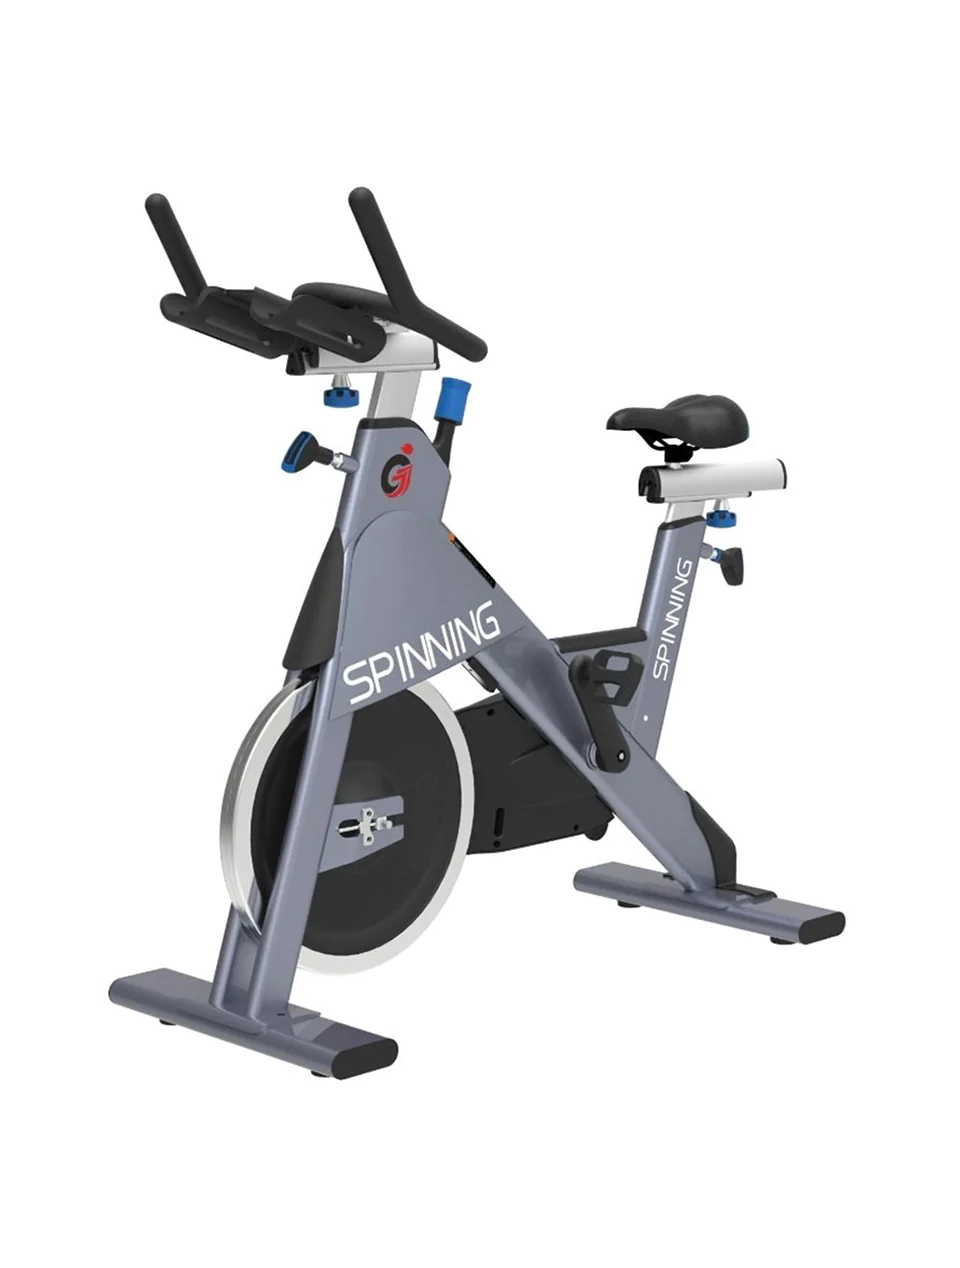 Afton Commercial Spin Bike